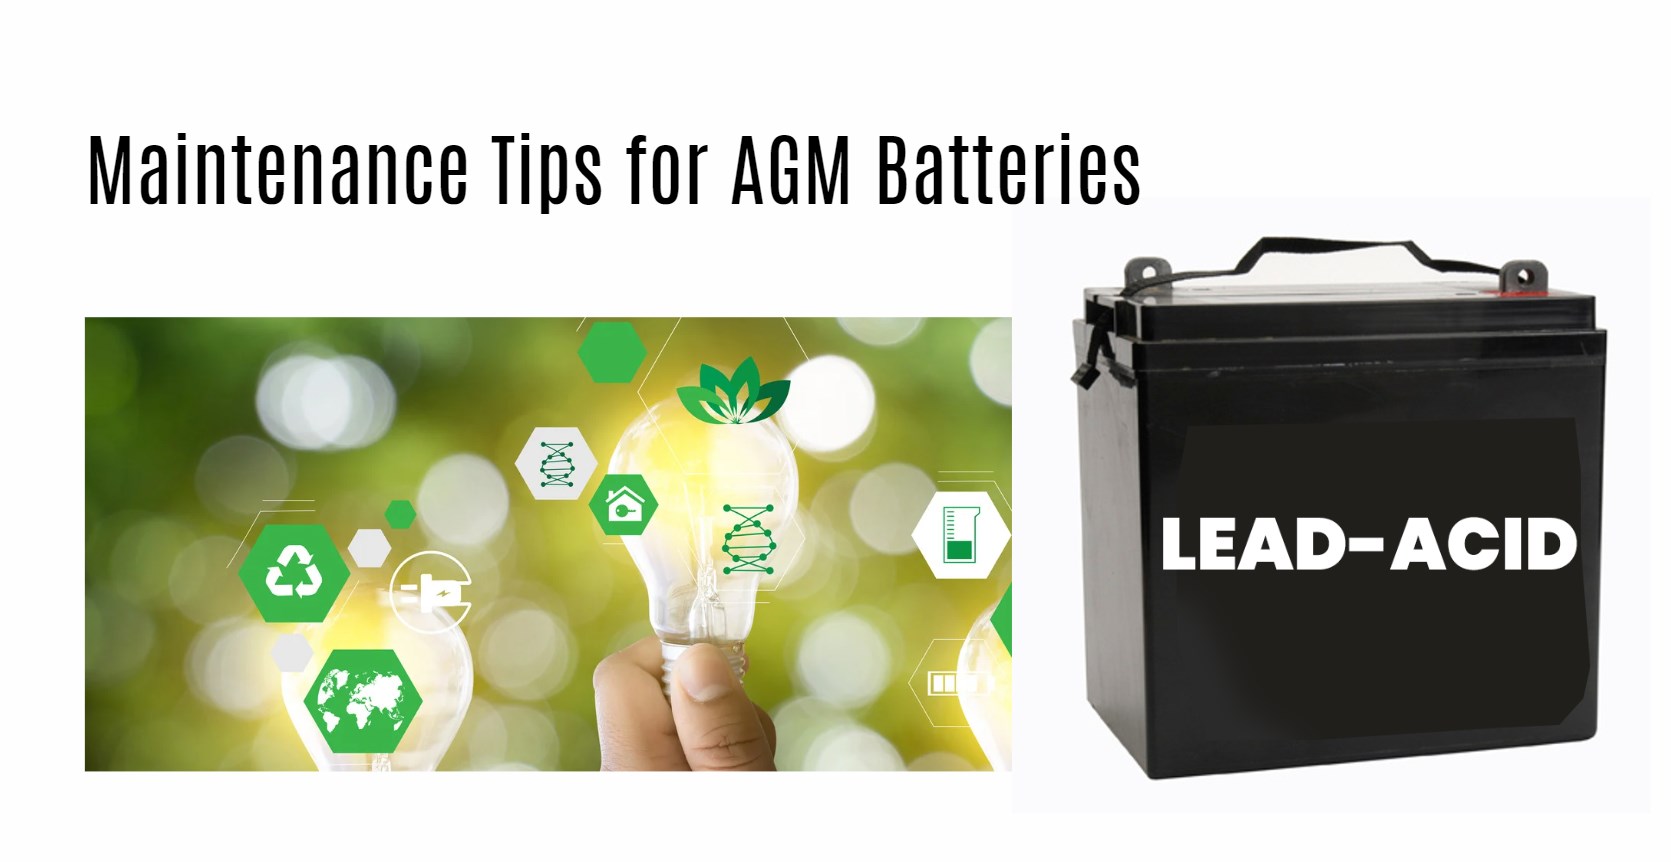 Maintenance Tips for AGM Batteries. Guide to Charging and Maintaining AGM Batteries